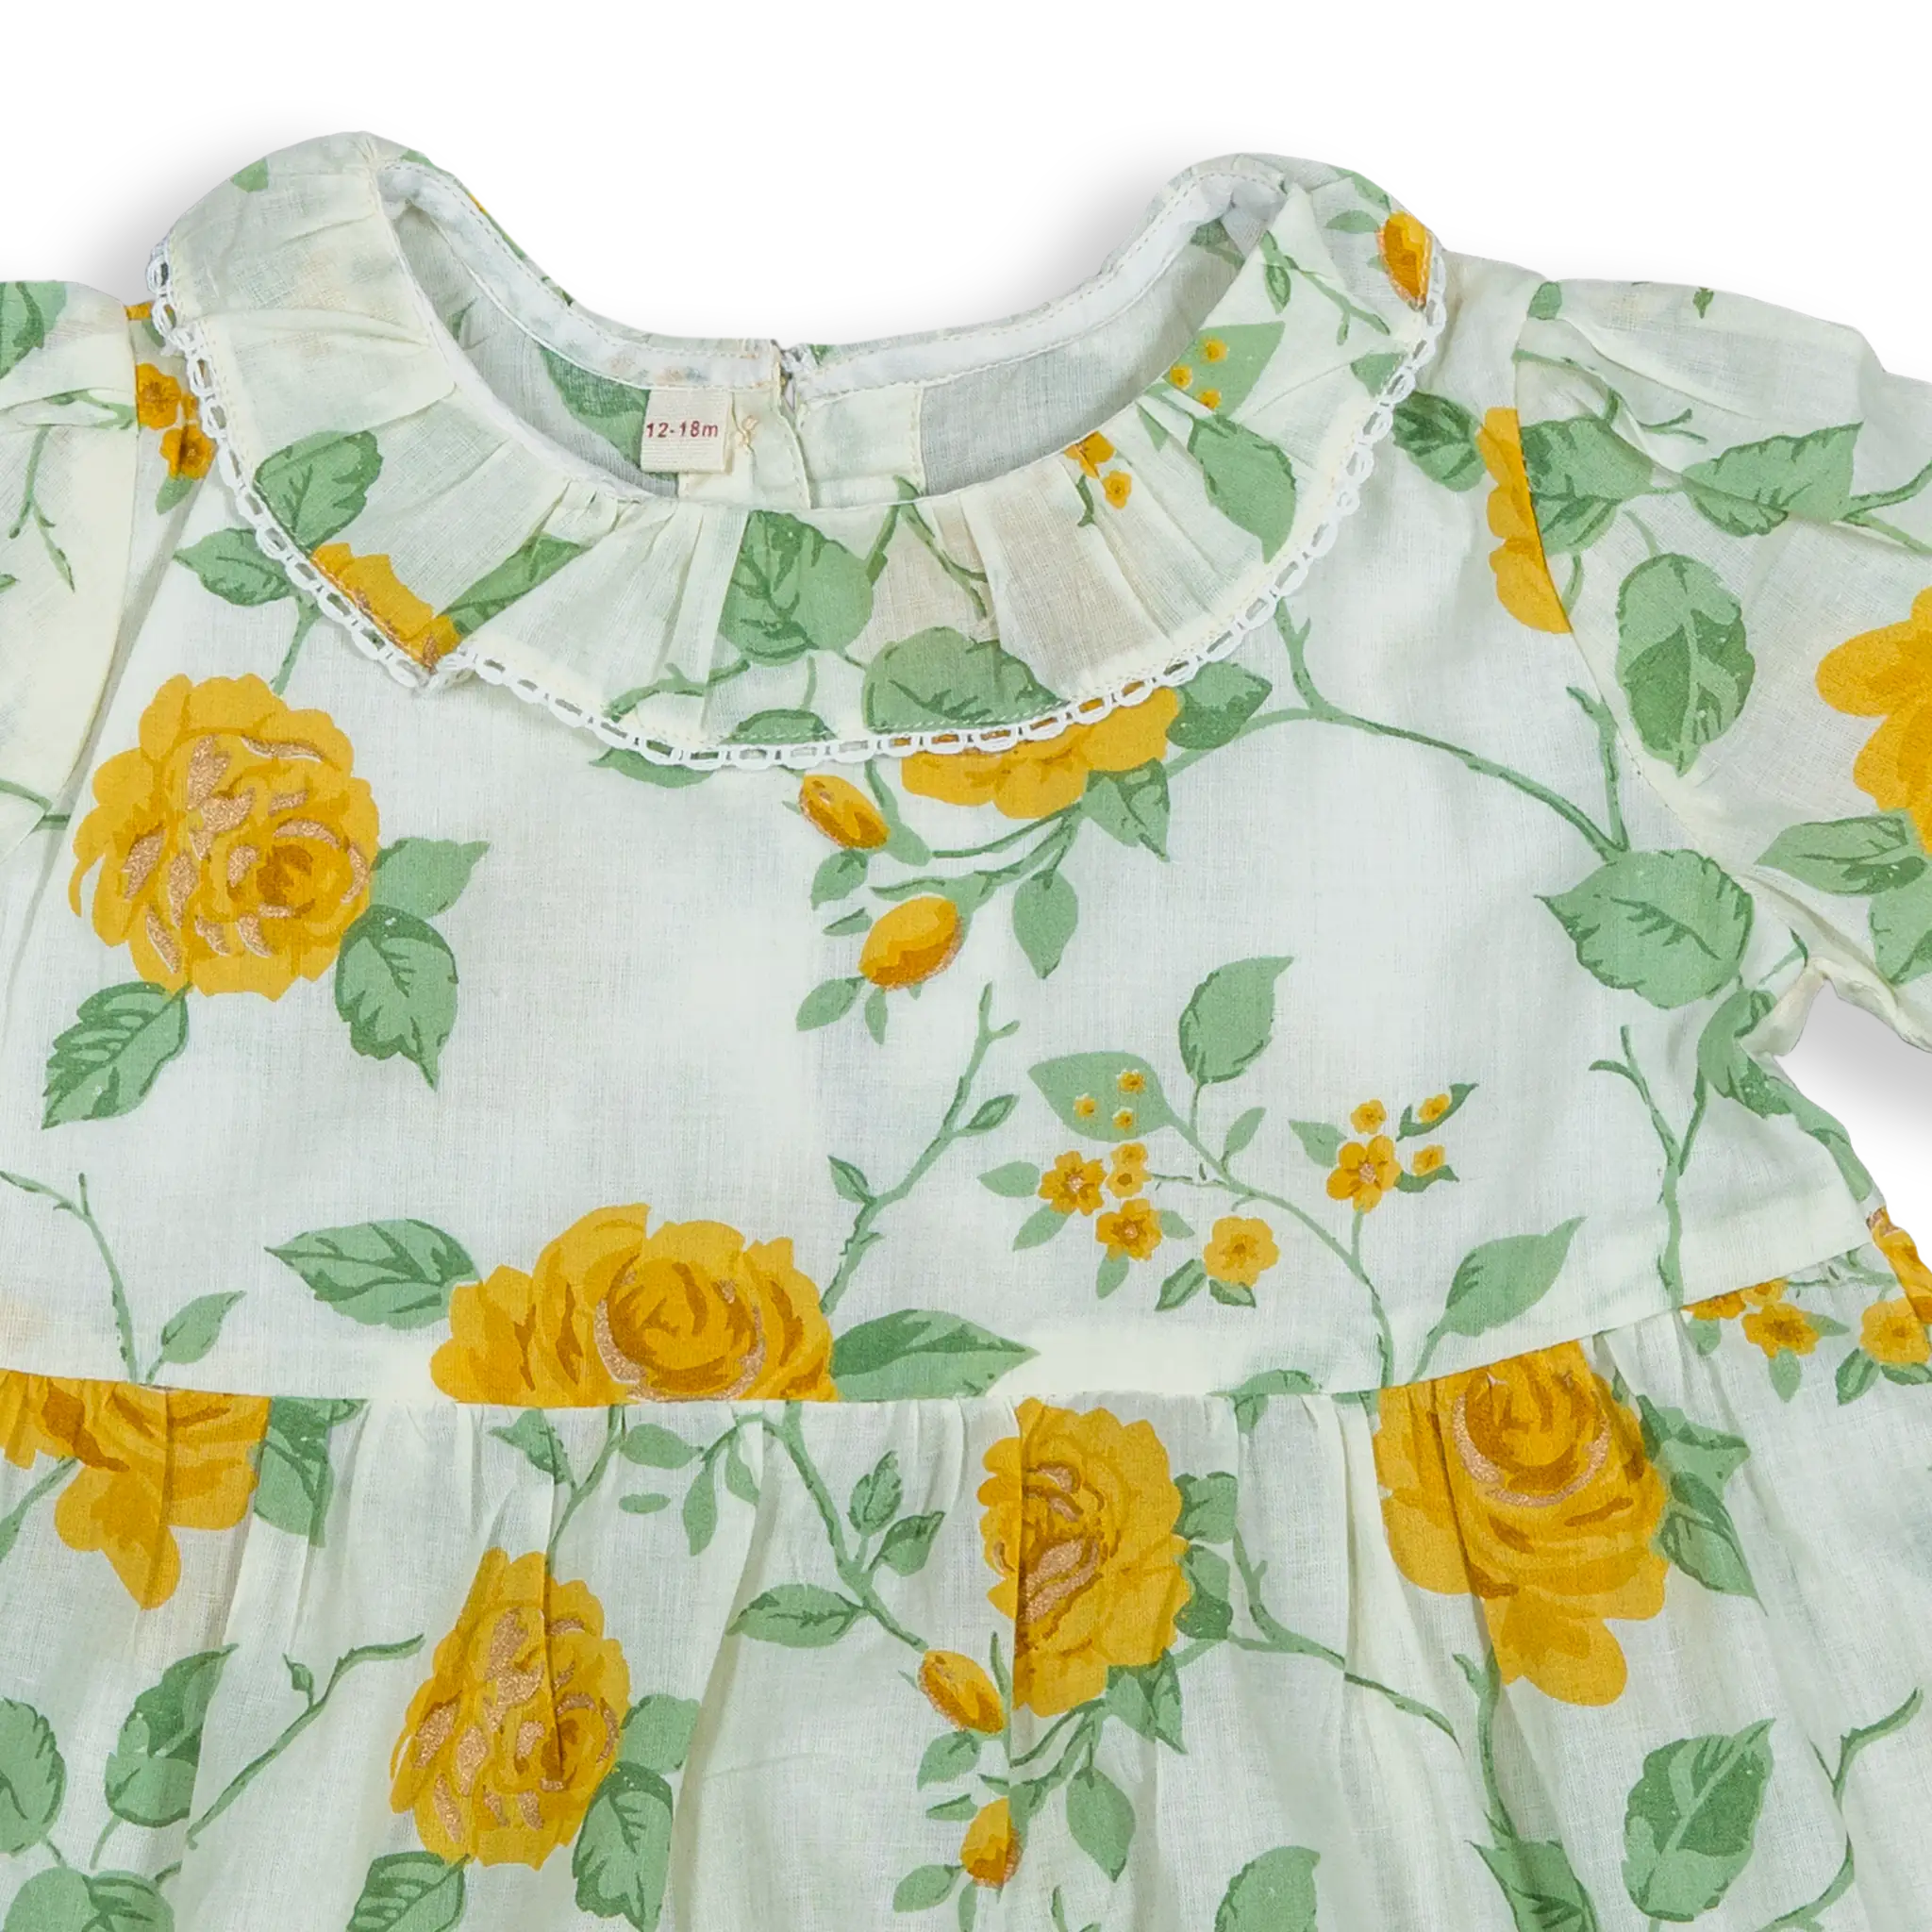 Introducing our Classic Rose print 100% Cotton dress for little girls, a delightful and timeless piece that will make your little one shine. Crafted from high-quality cotton, this dress offers a soft and gentle feel against the skin, ensuring utmost comfort for your child.